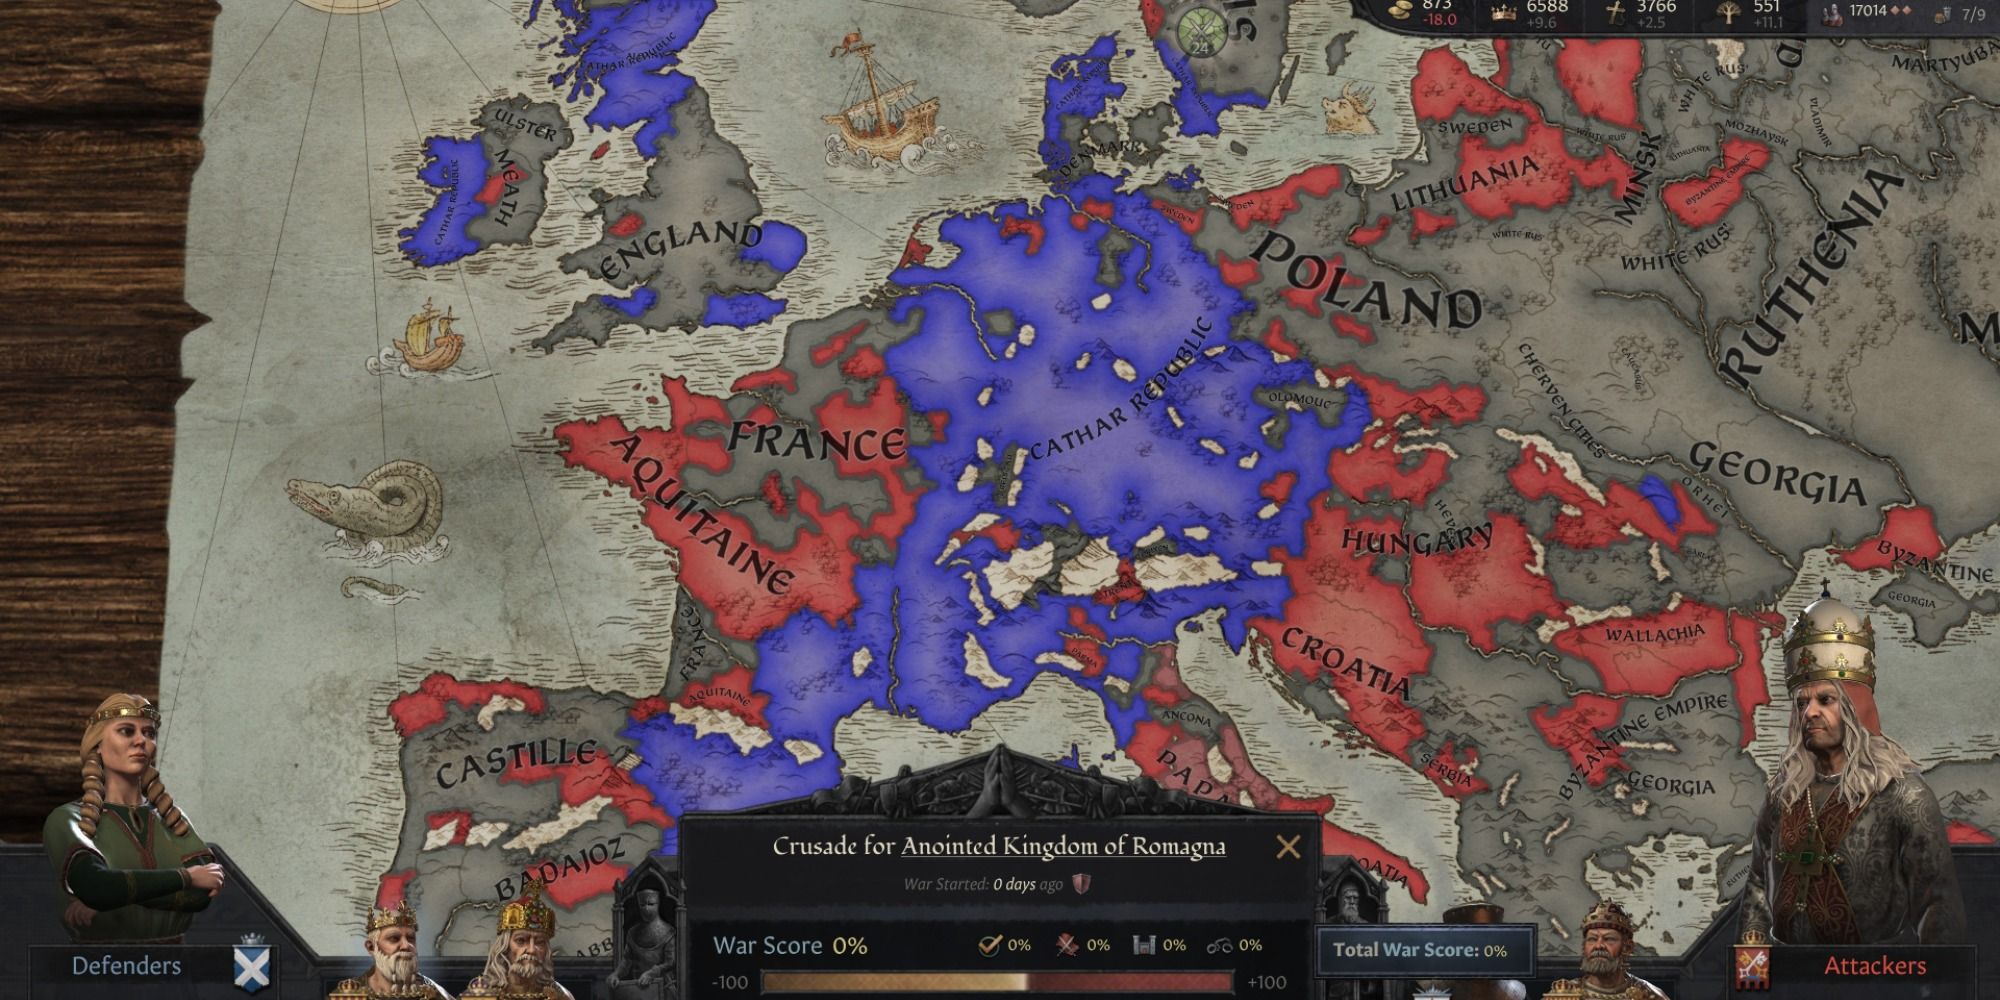 crusader kings 2 how to play poland from beginning